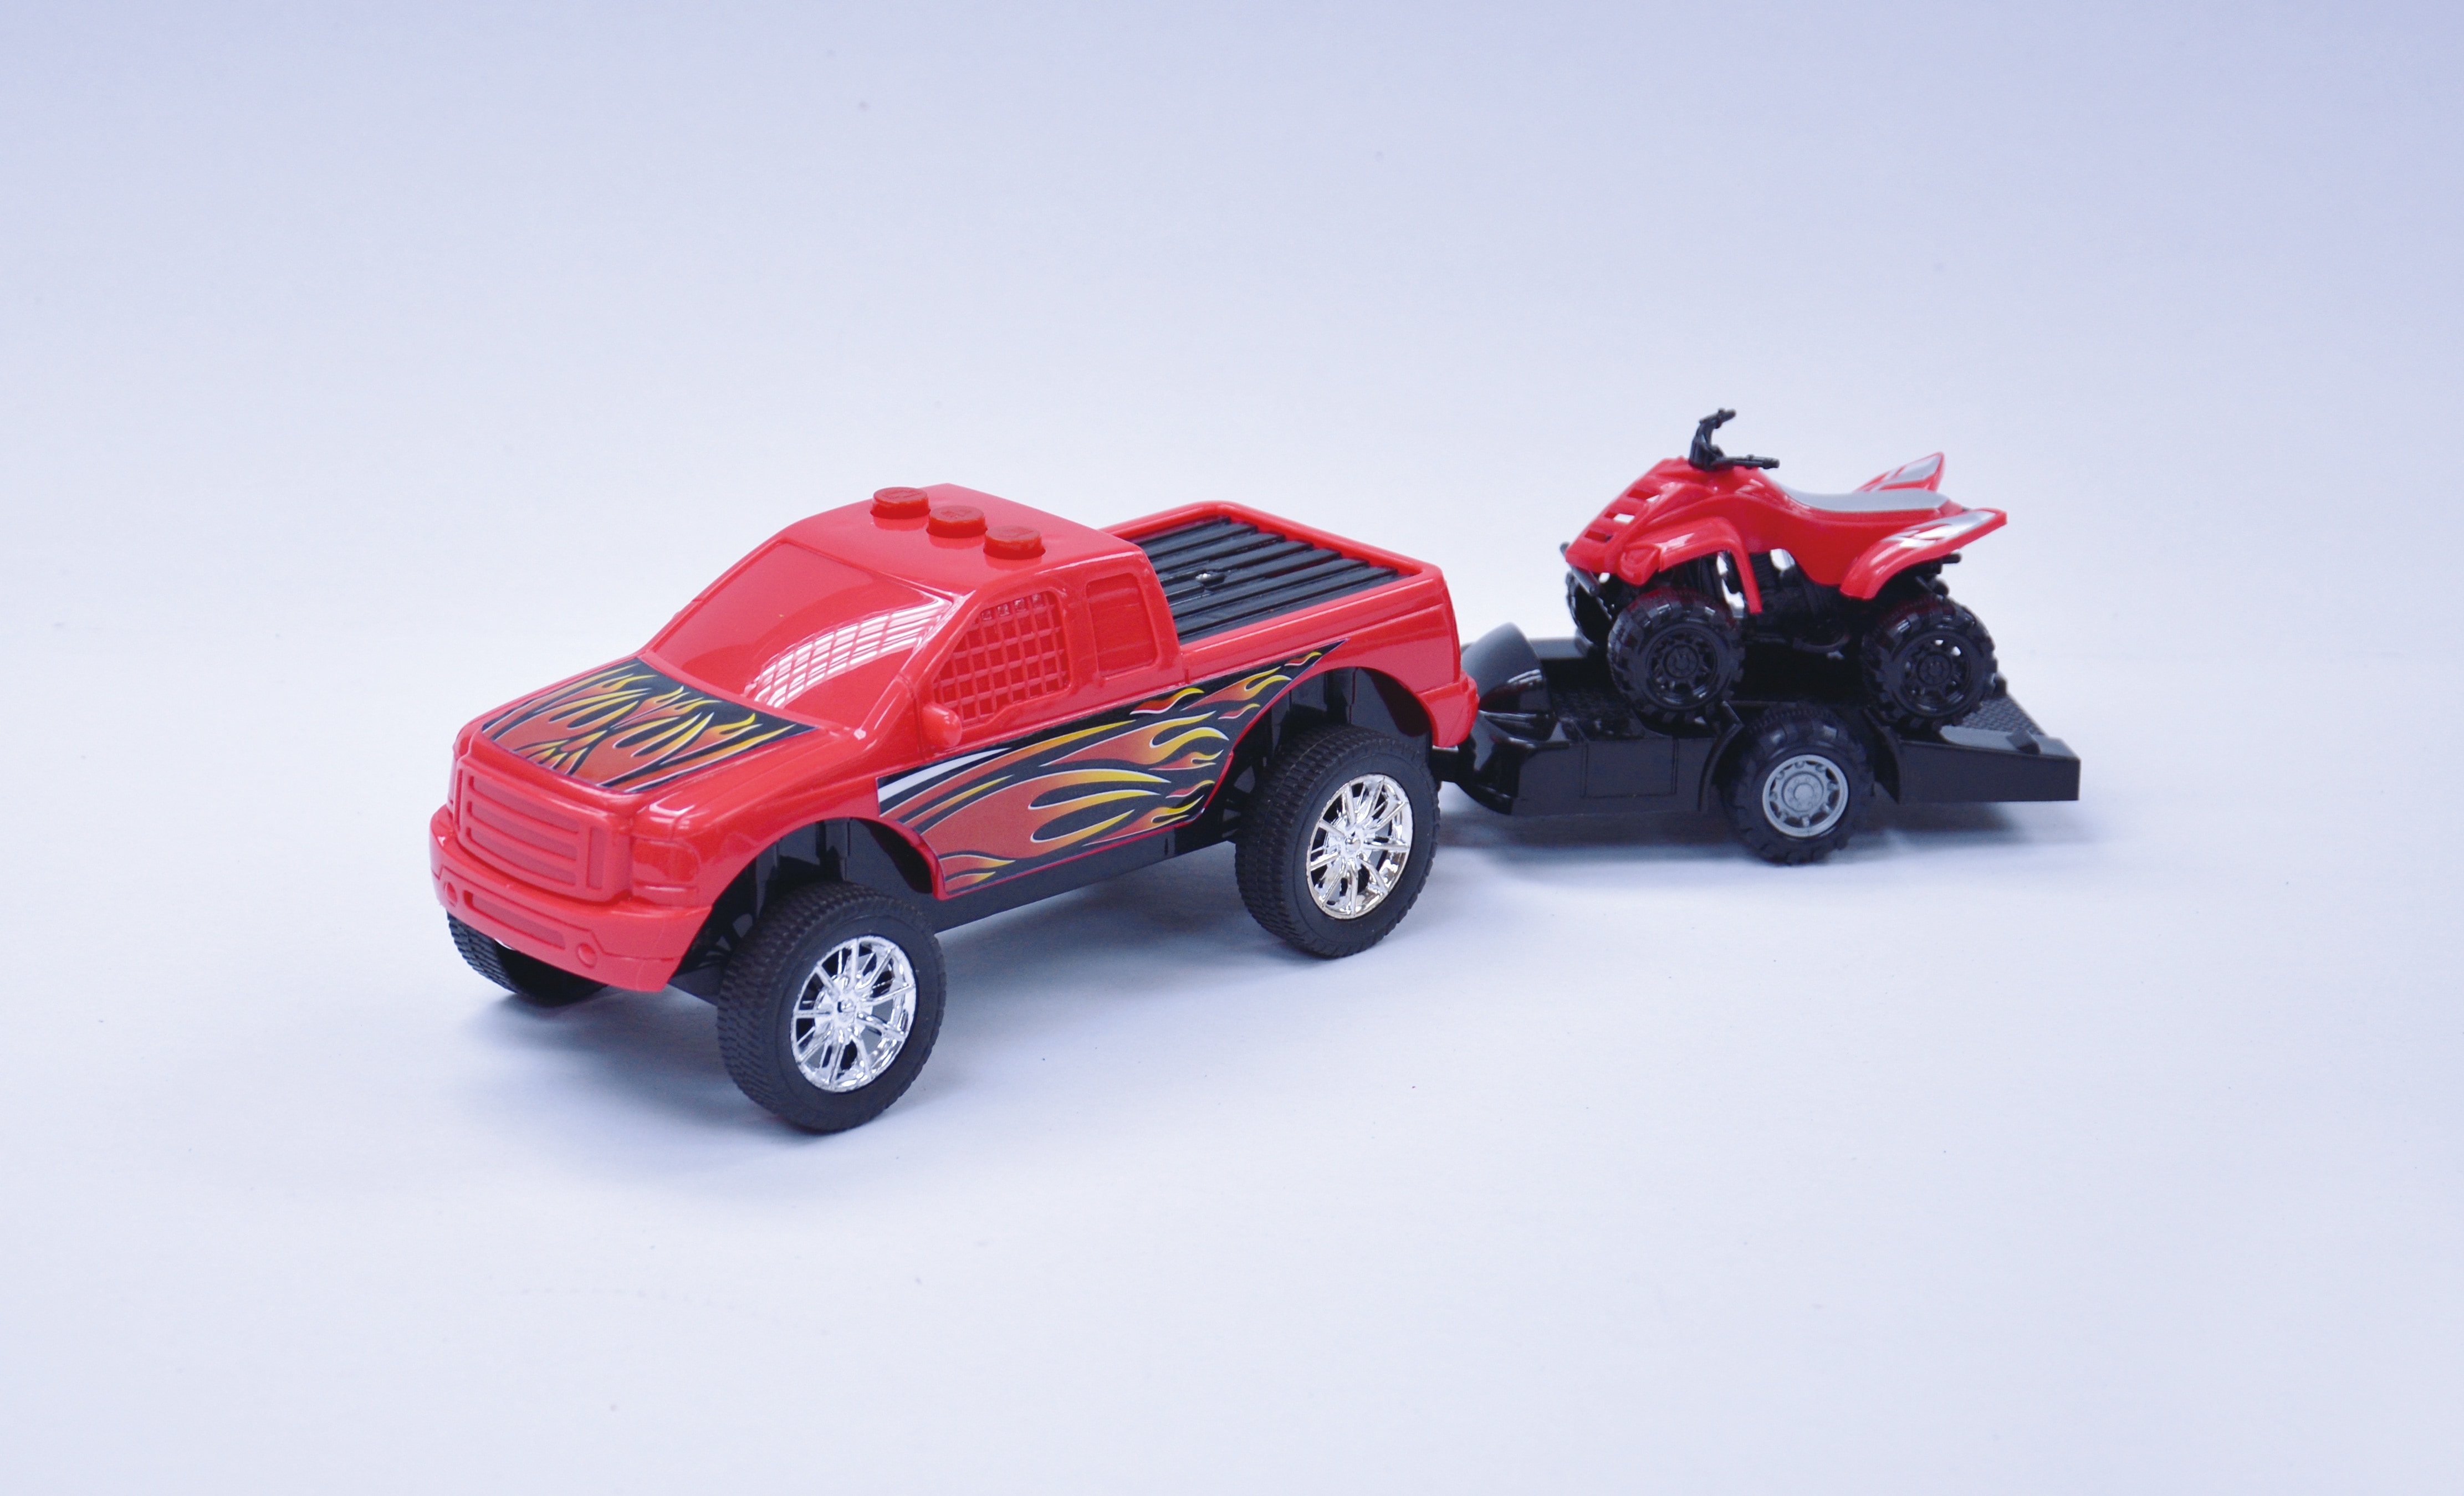 red rc toy truck and atv quad bike